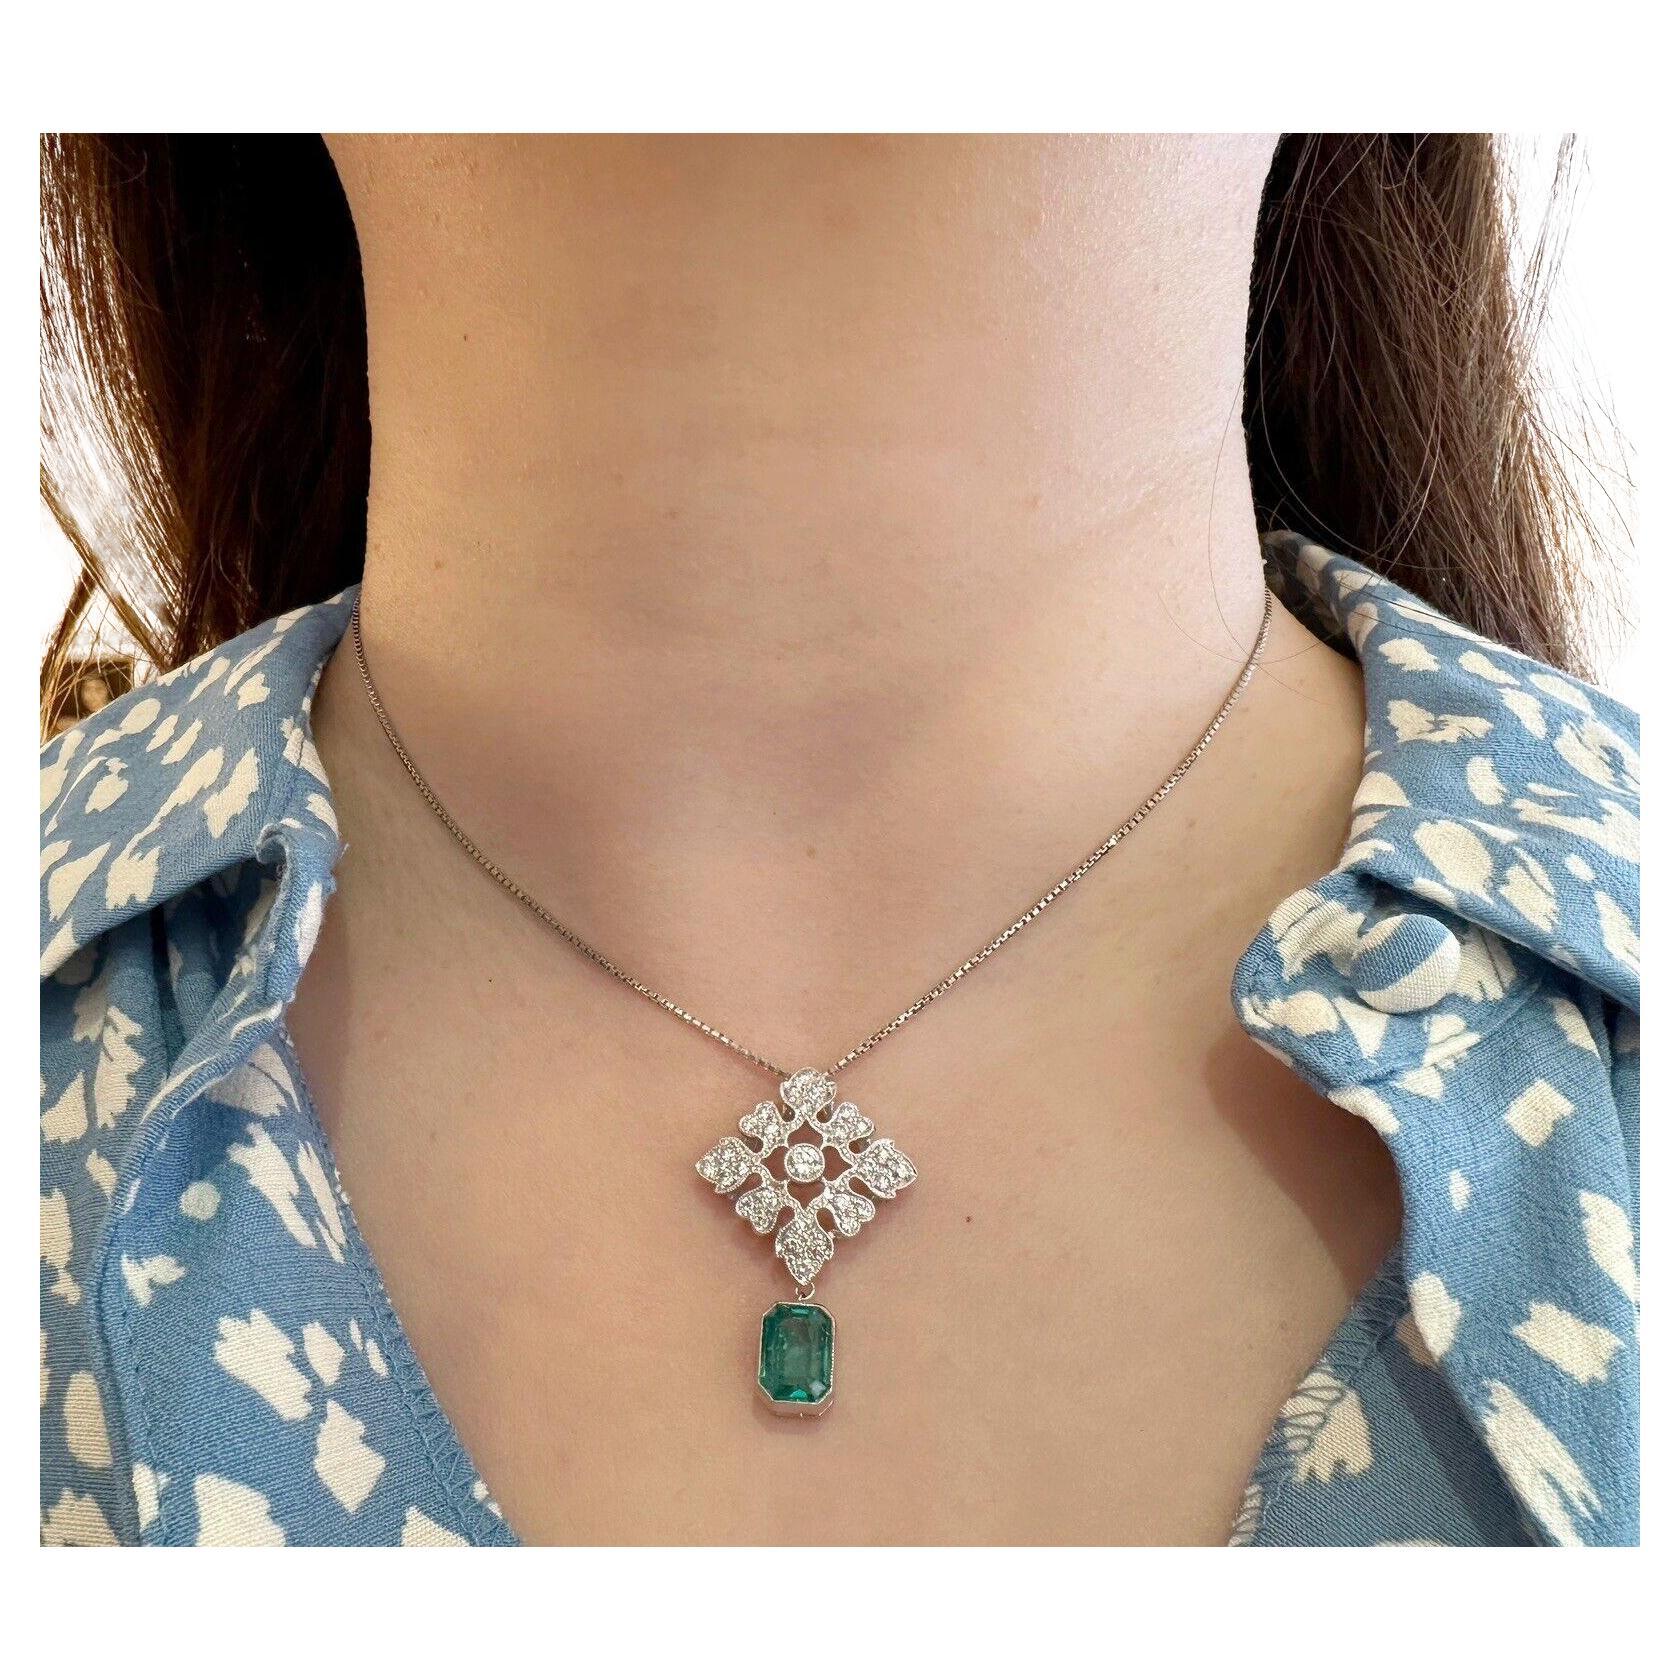 Diamond & Emerald Drop Pendant Necklace in Platinum

Emerald and Diamond Necklace features a 2.04 carat Emerald cut Natural Emerald, bezel set in Platinum, hanging from a Diamond medallion with 0.76 carats of Round Brilliant Diamonds set in Platinum